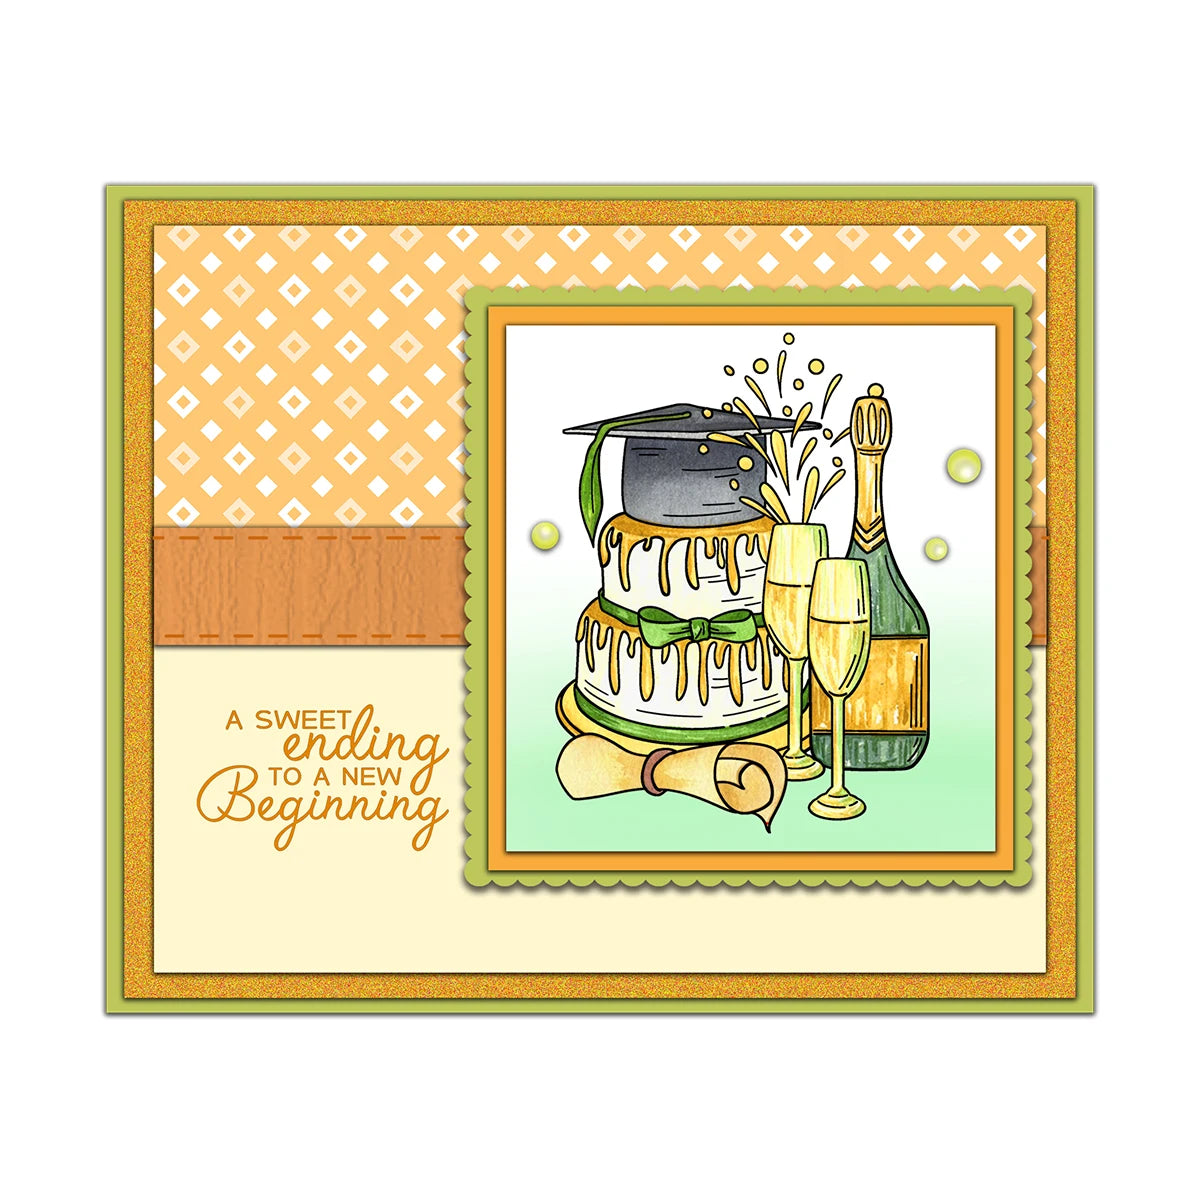 Lovely Celebrations For Graduation Season Transparent Stamps, Stamp/Cutting Die (please order items separately)